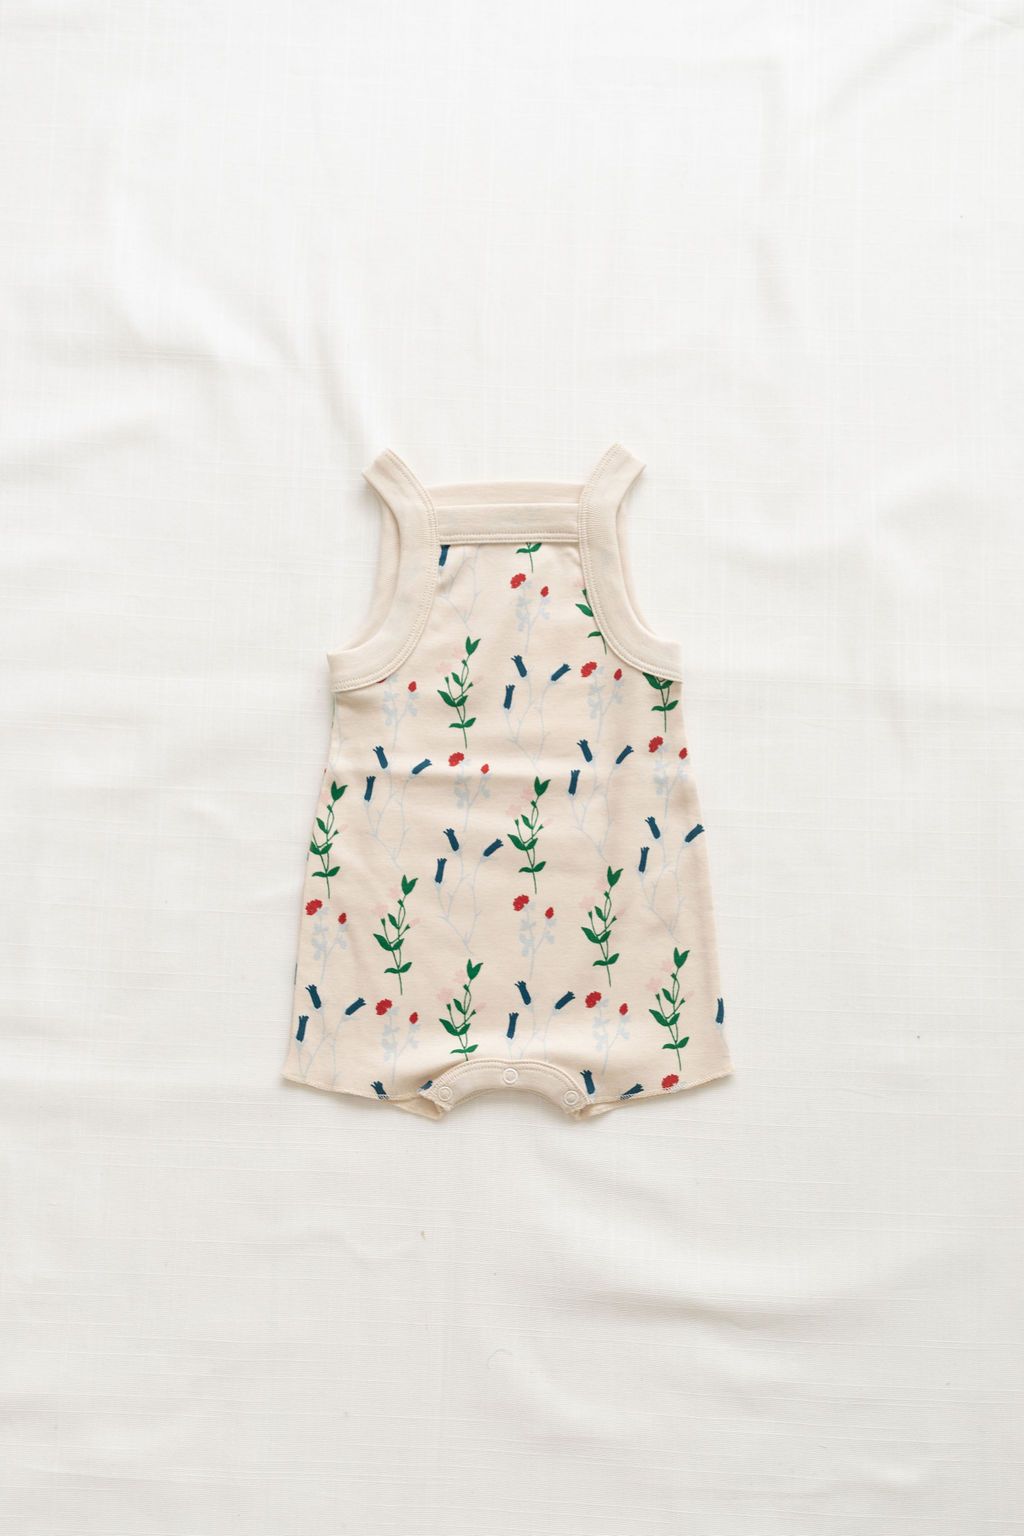 Fin & Vince Chunky Romper, Garden Floral